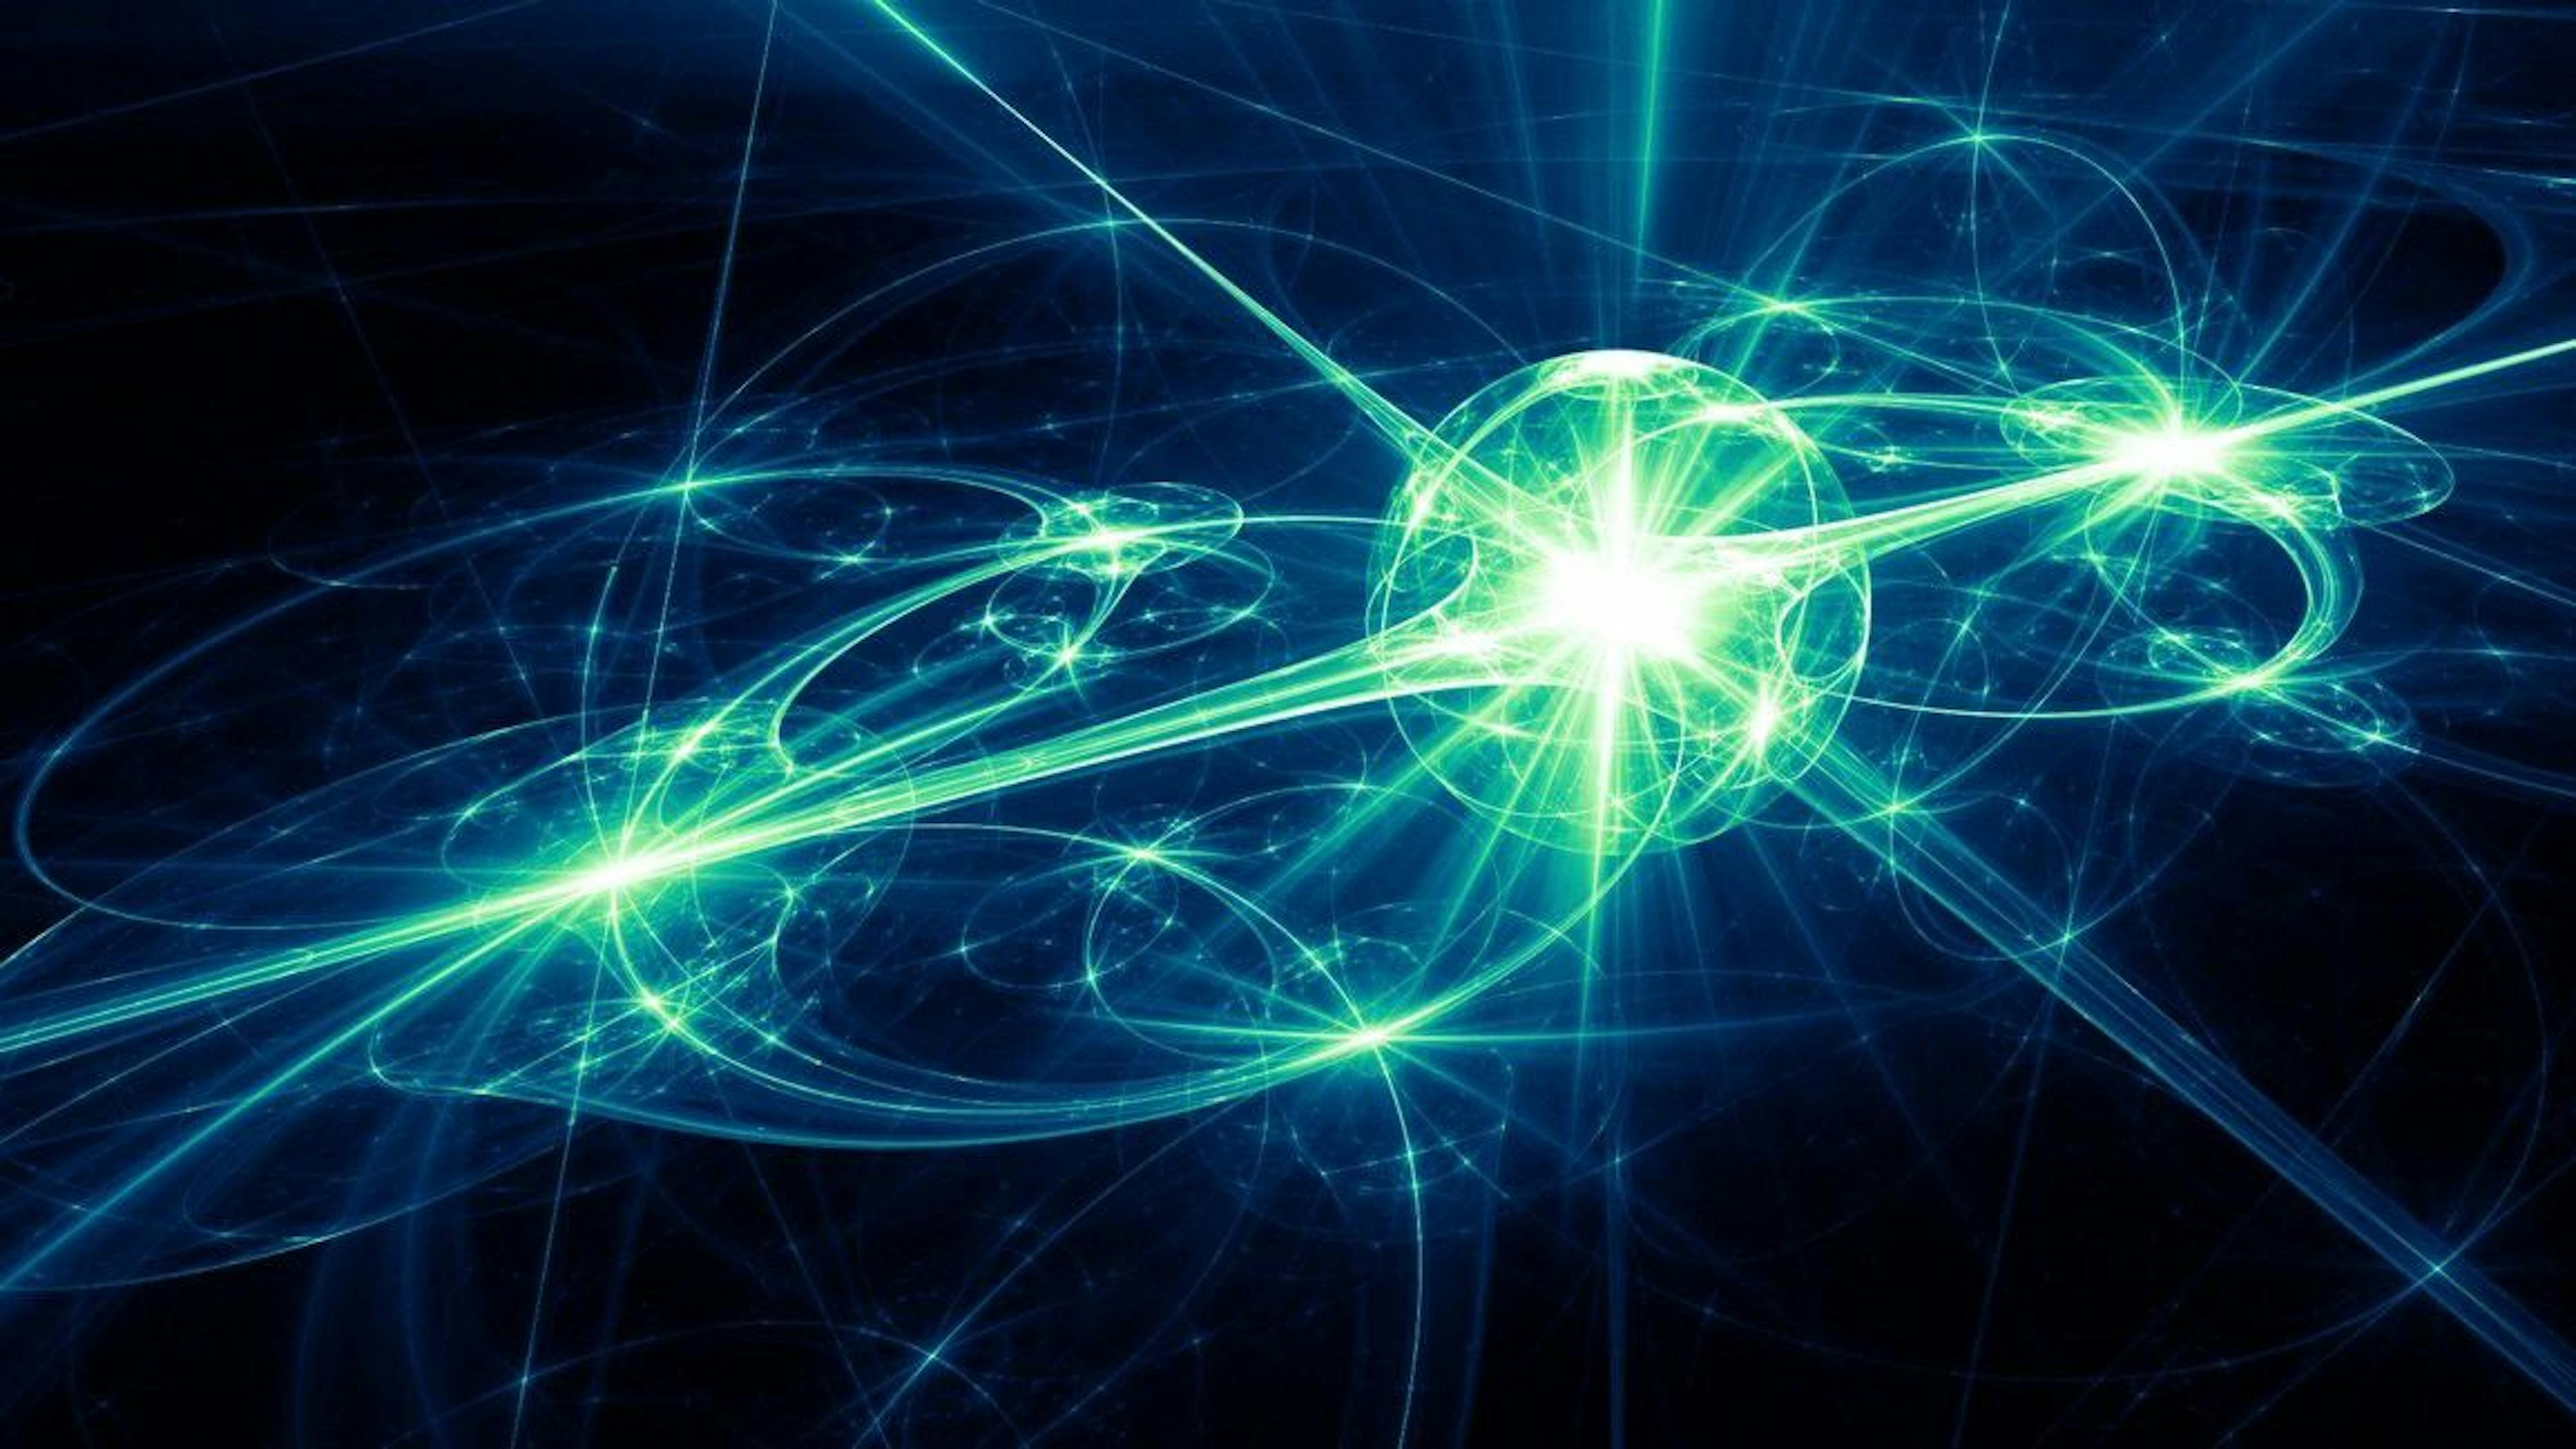 https://wallpapers.com/wallpapers/theoretical-physics-green-particles-ht1c16rgtu5ilkhc.html adresinden